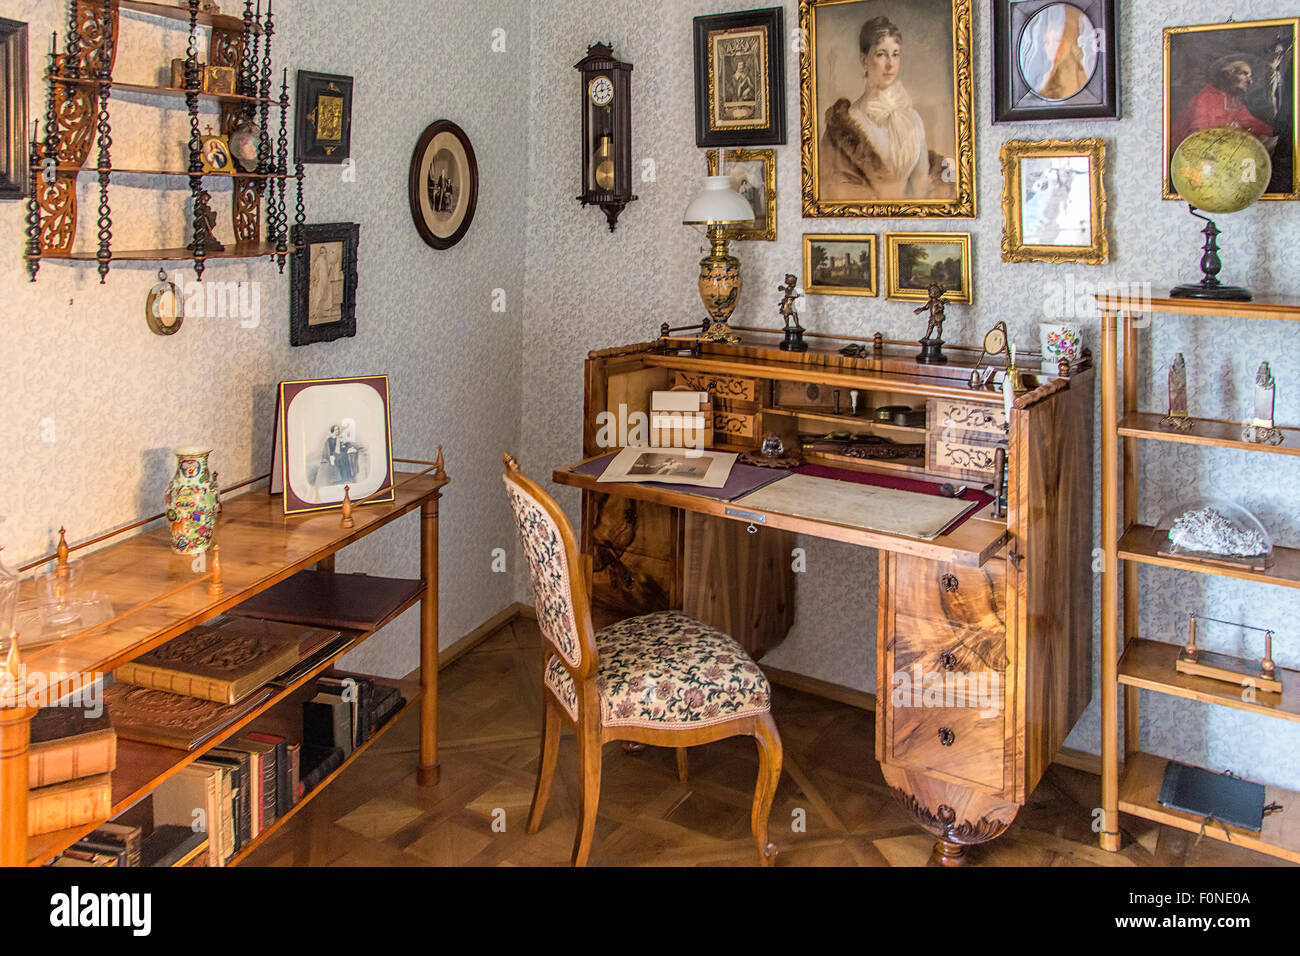 Rozumberk Castle (south of Prague), Czech Republic - August 2, 2015: The study or work room in classical Biedermeier style inter Stock Photo